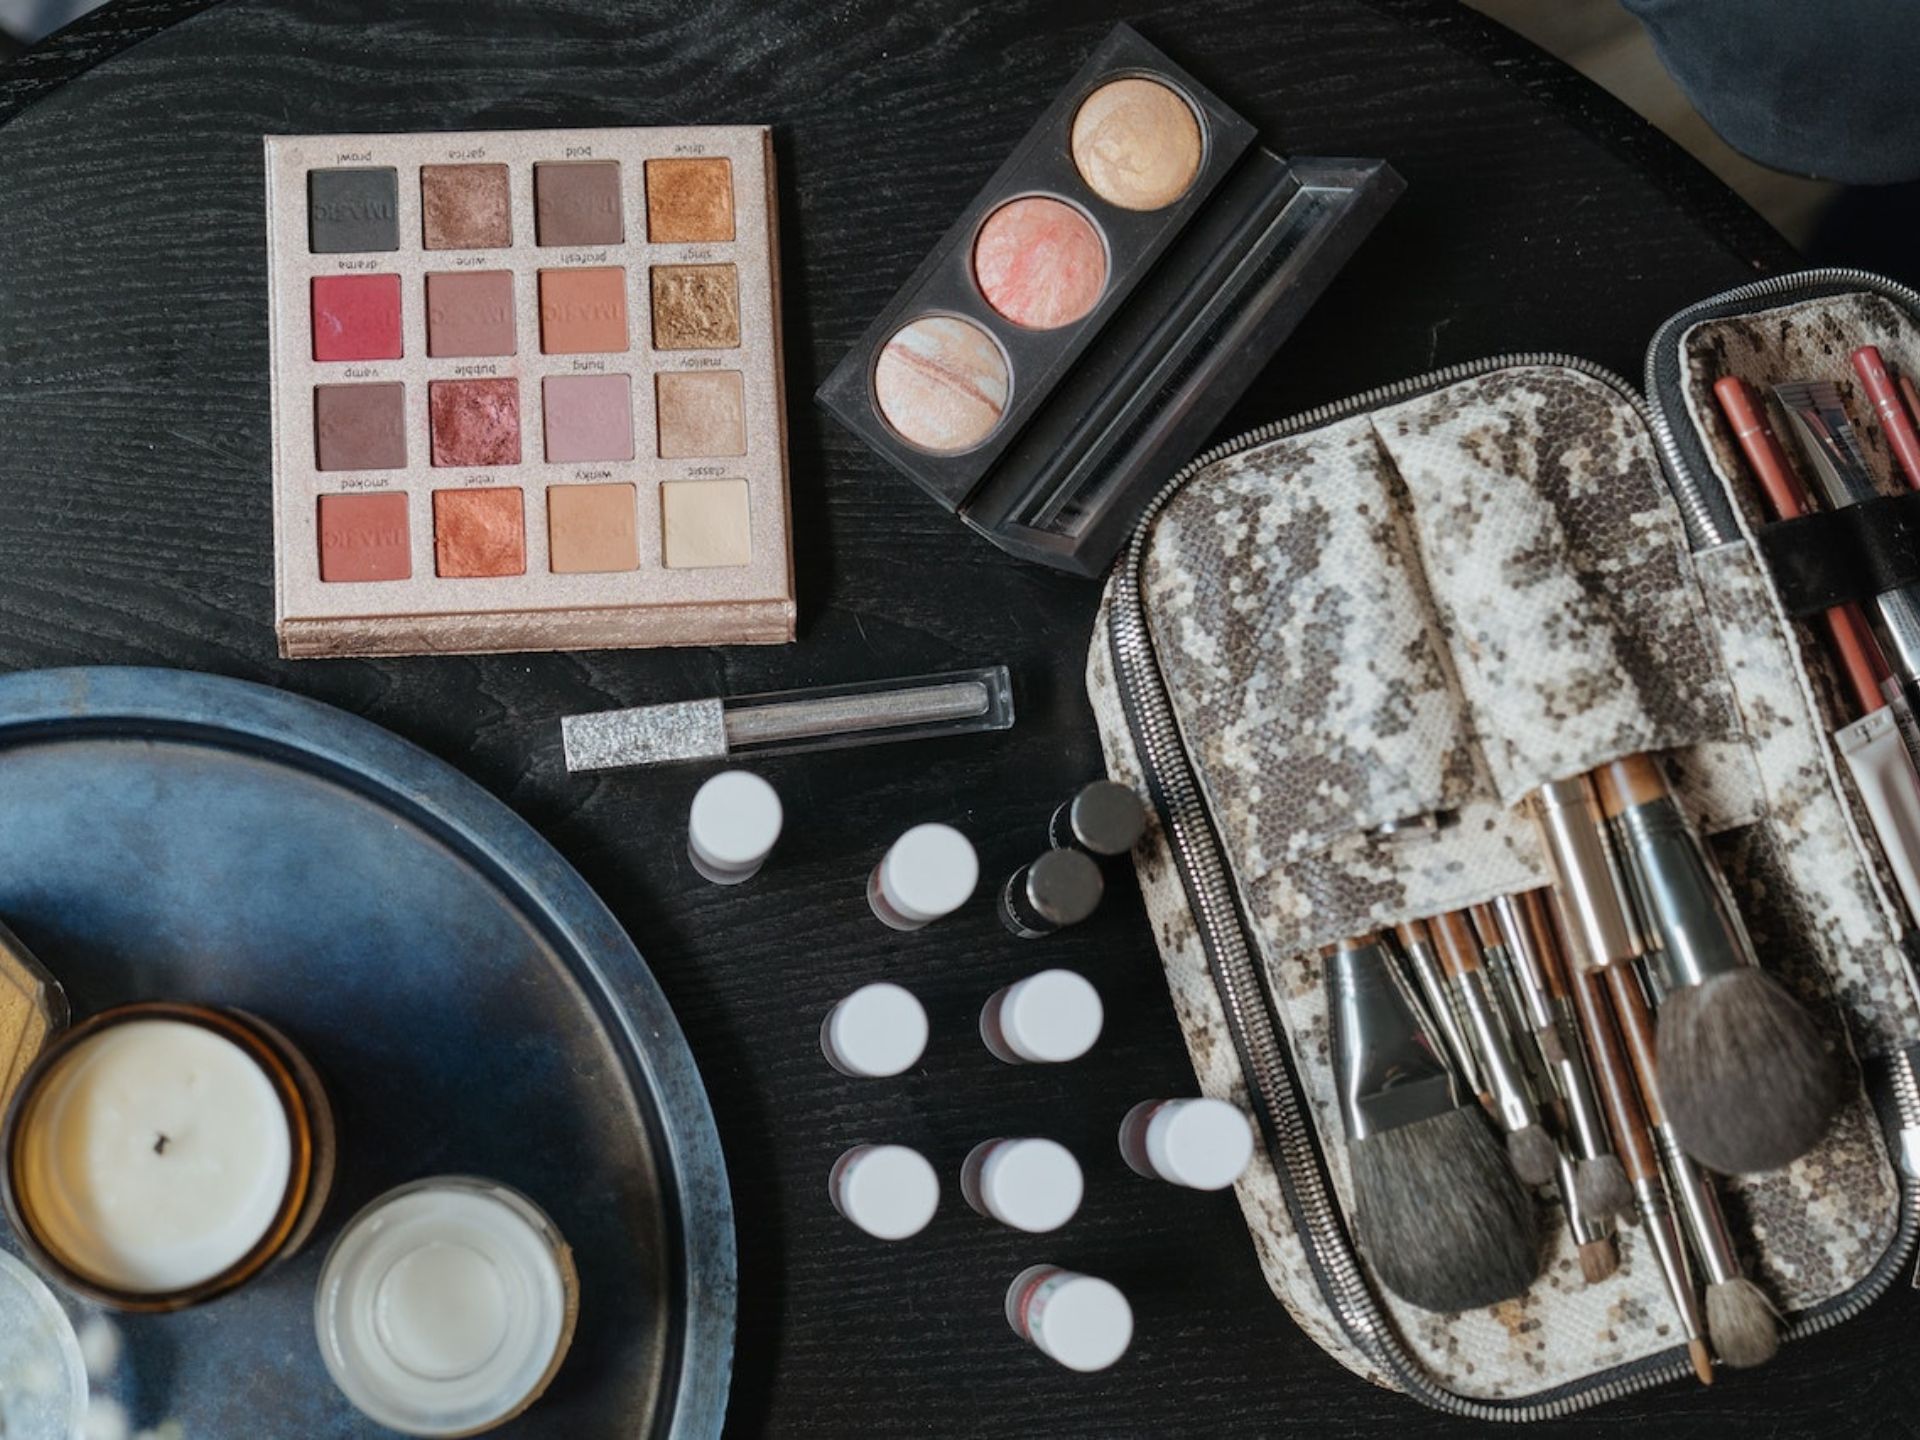 A bag filled with makeup items.